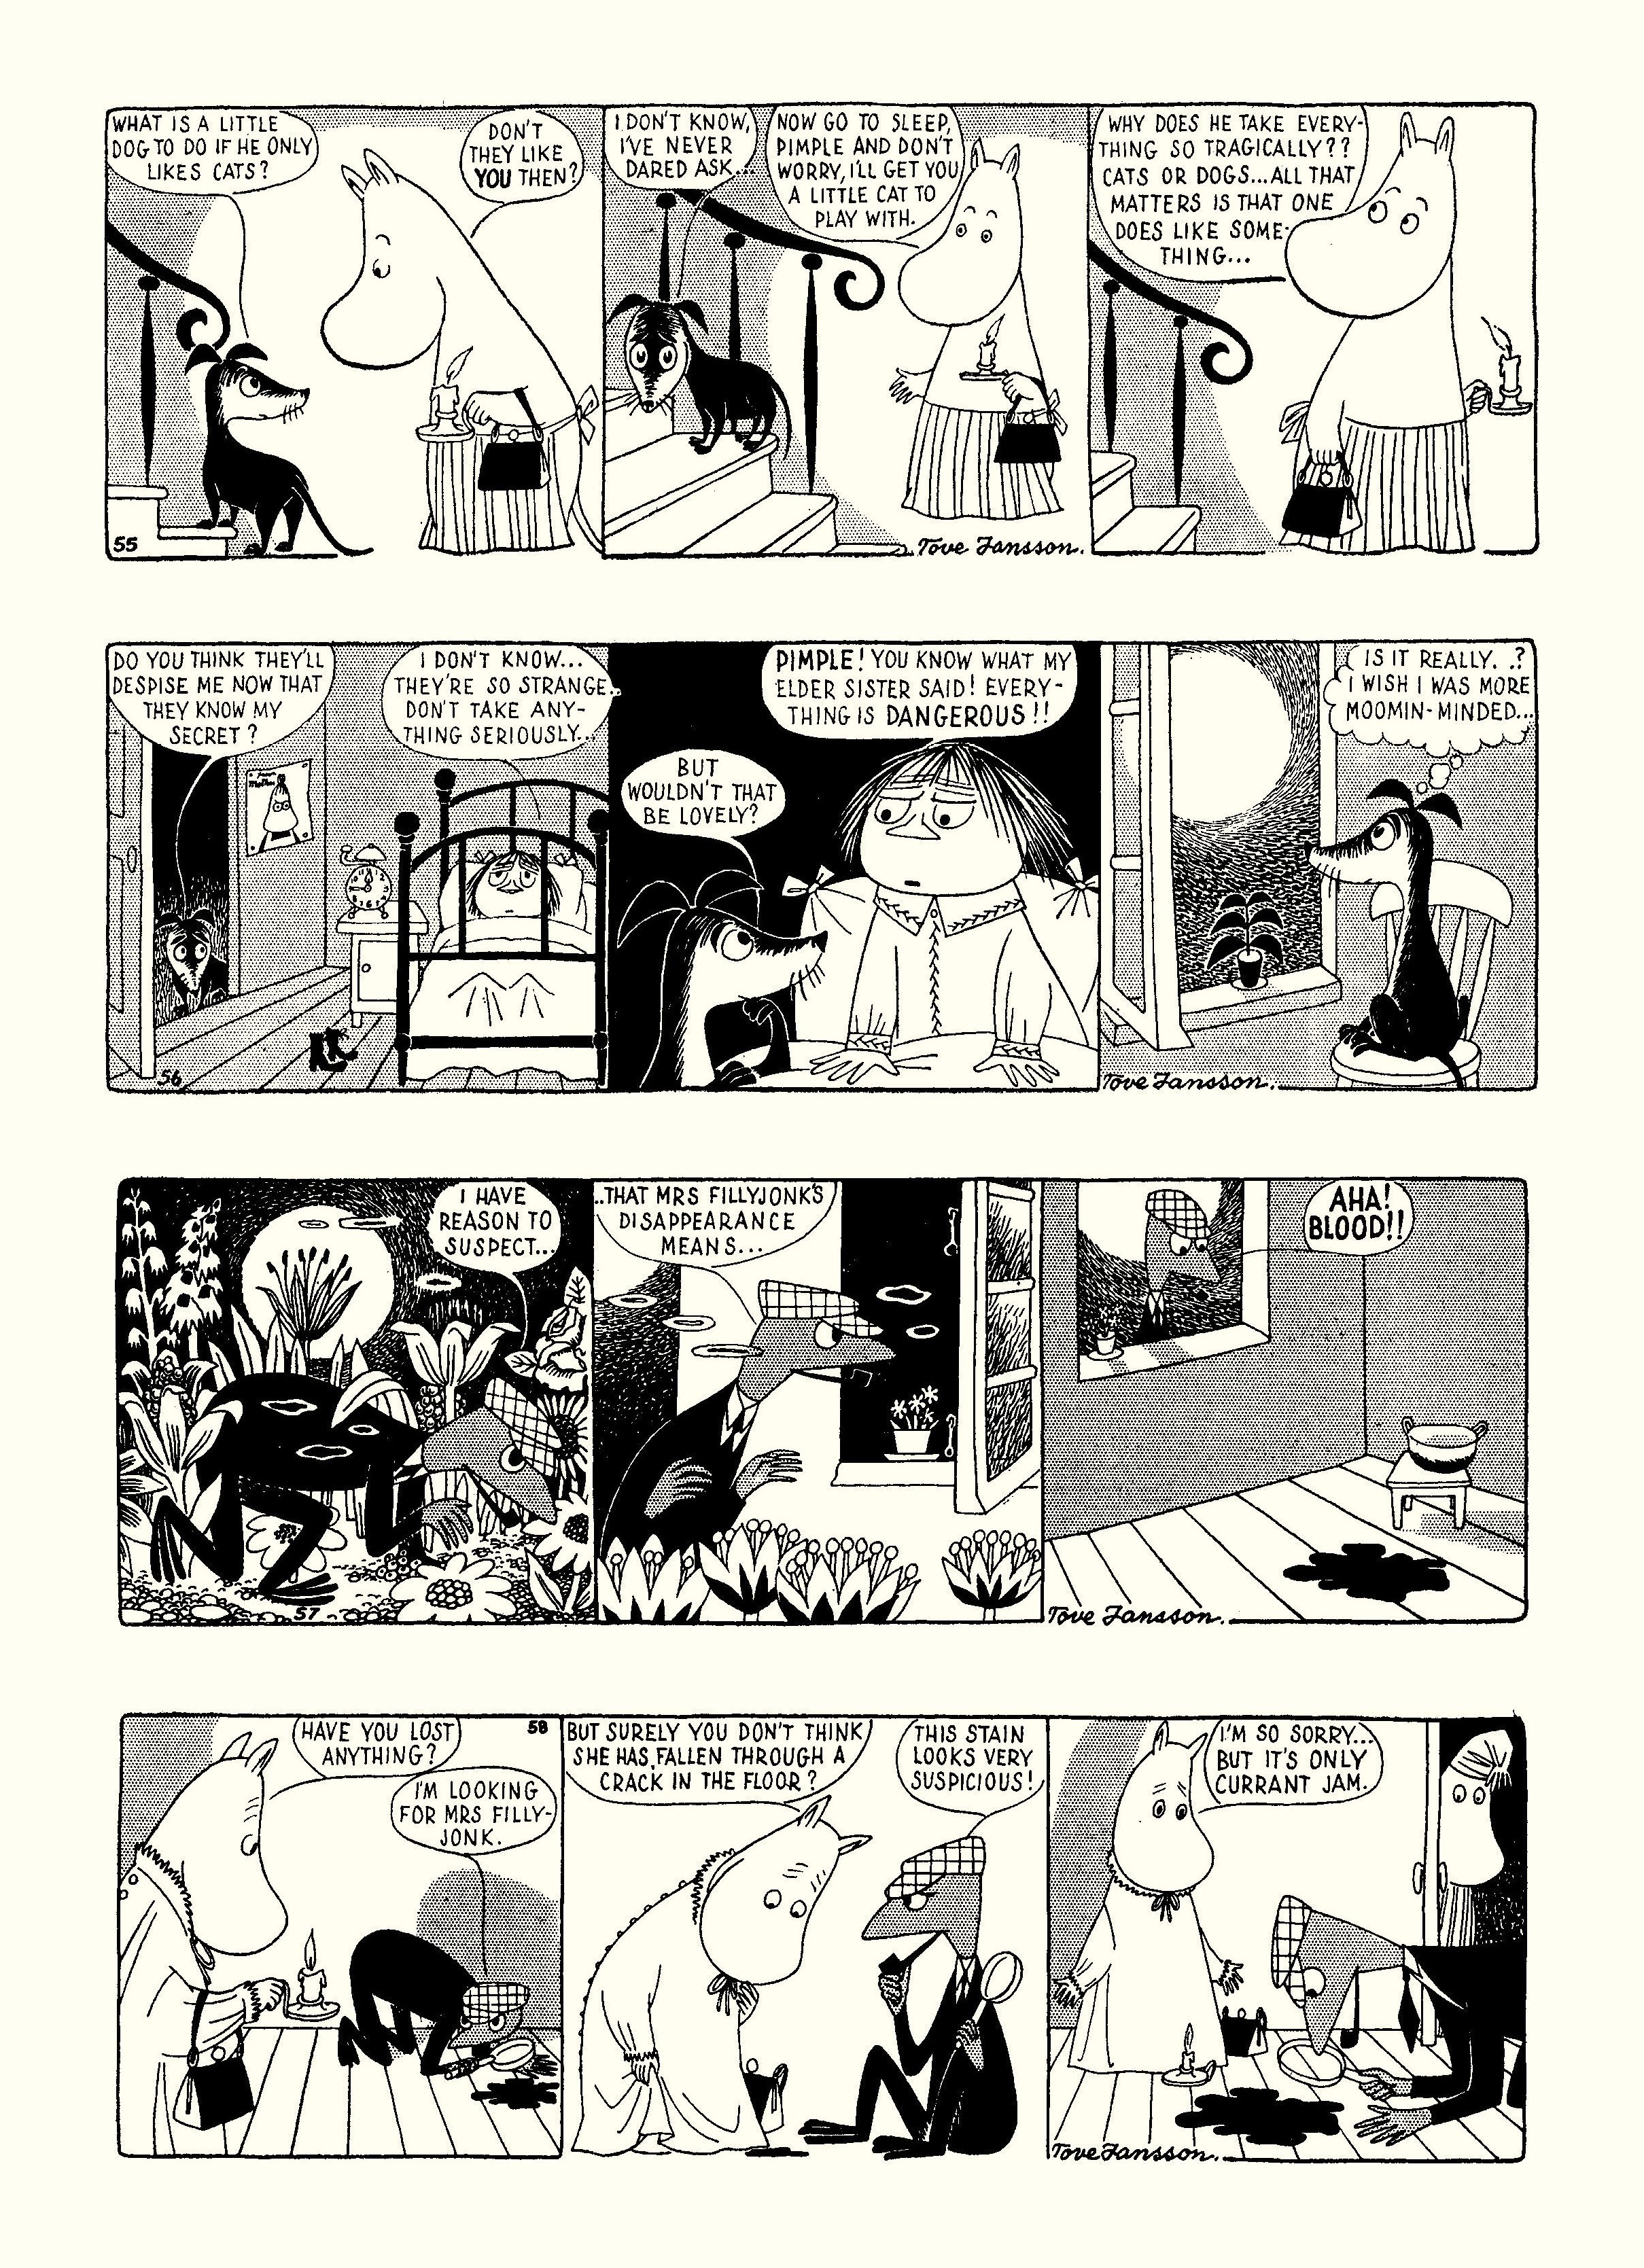 Read online Moomin: The Complete Tove Jansson Comic Strip comic -  Issue # TPB 2 - 41